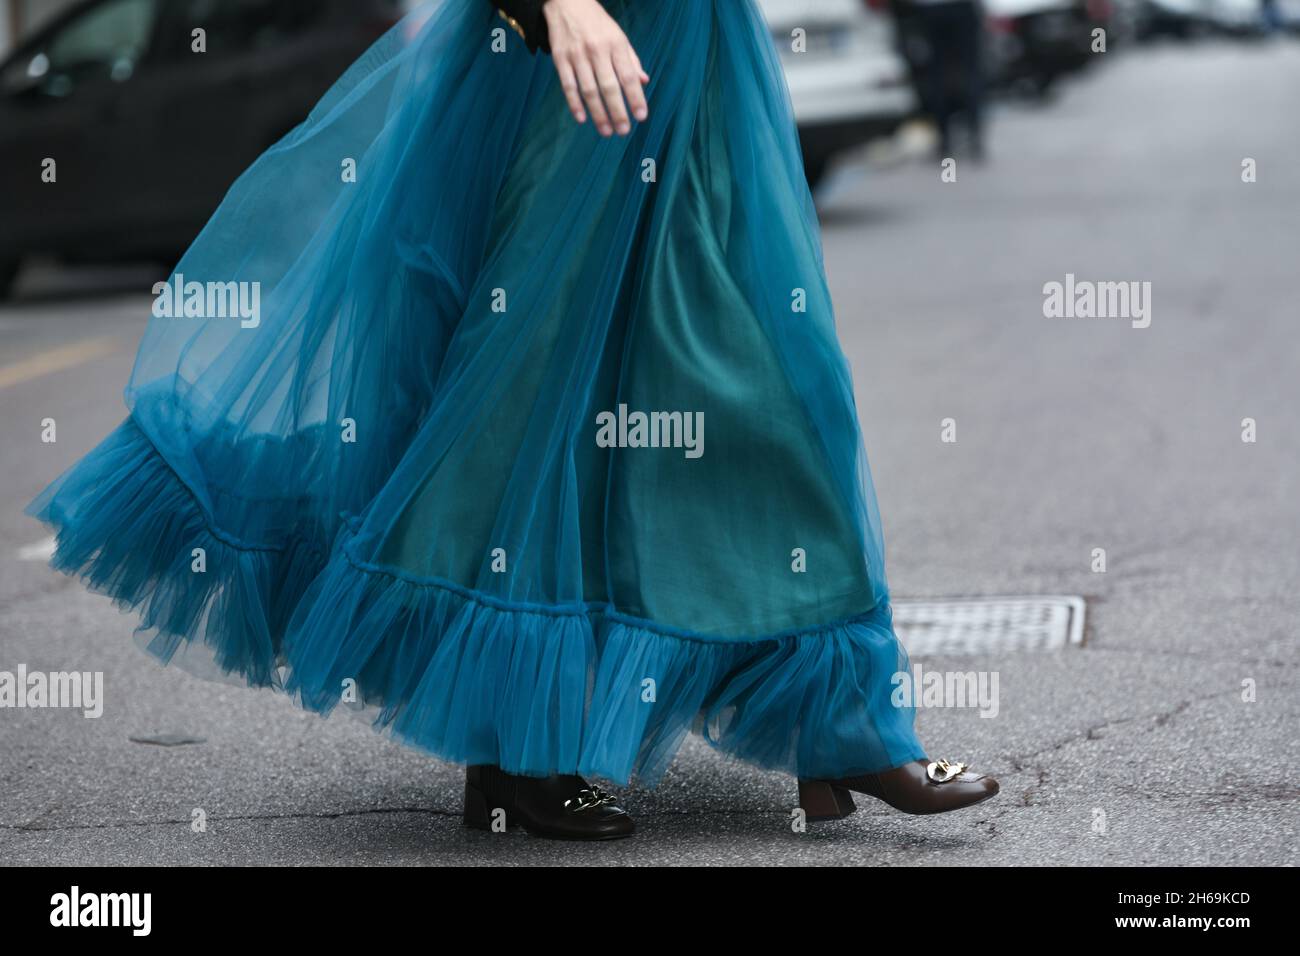 Milan, Italy - September 25, 2021:  Street style outfit, woman wearing a fashionable outfit on the streets of Milan, Italy. Stock Photo